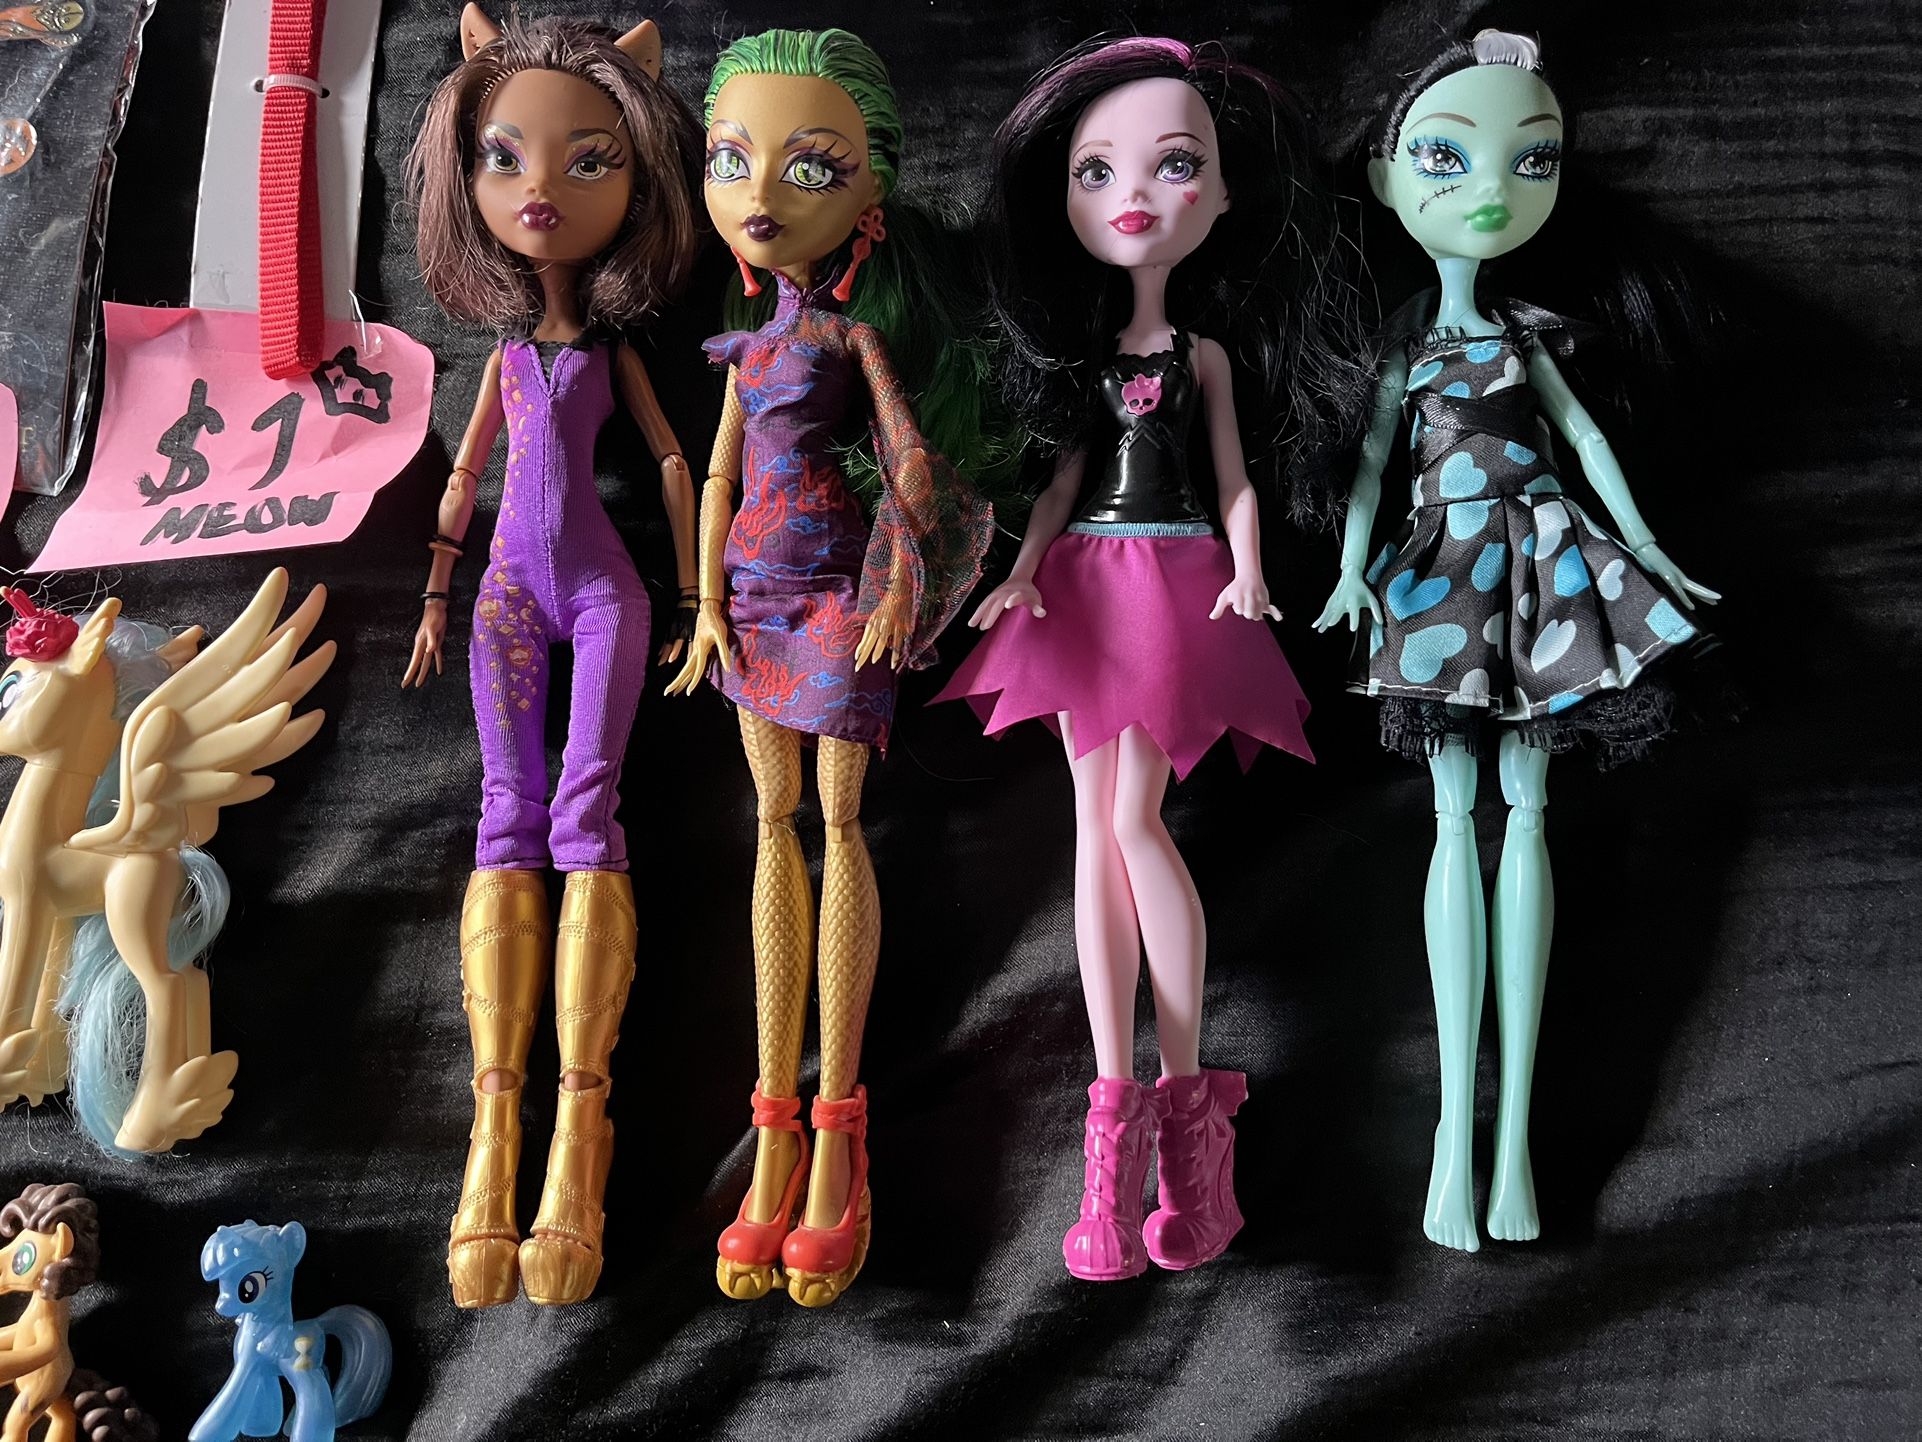 Monster high dolls/My little pony figs